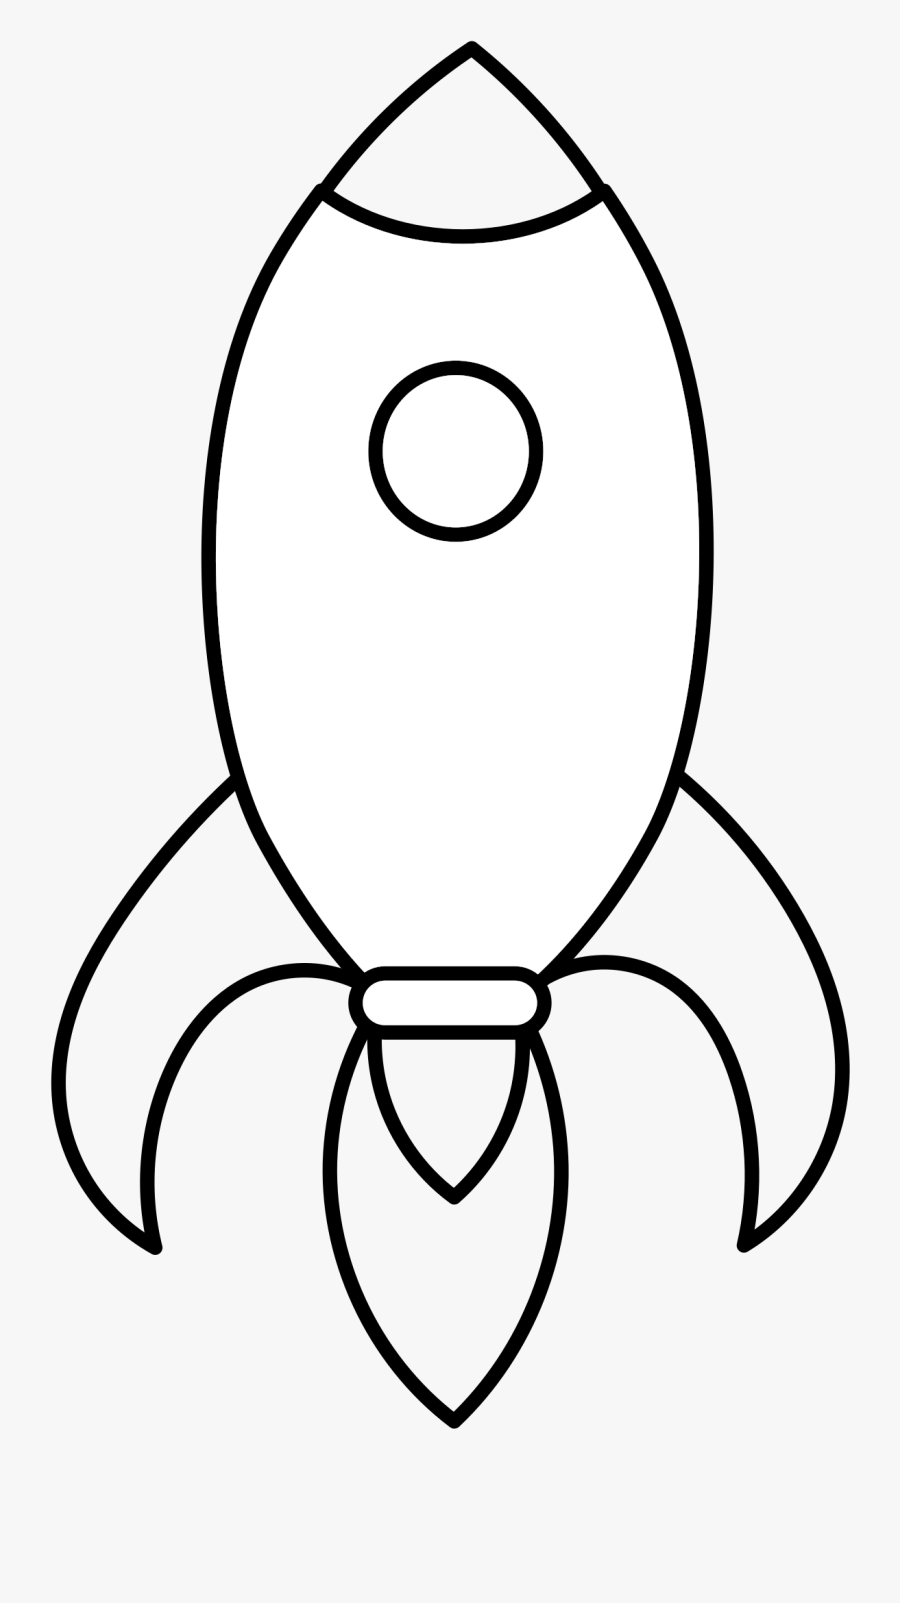 Rocket Ship Coloring Pages Space Drawing Images With - Rocket Clipart For Colouring, Transparent Clipart